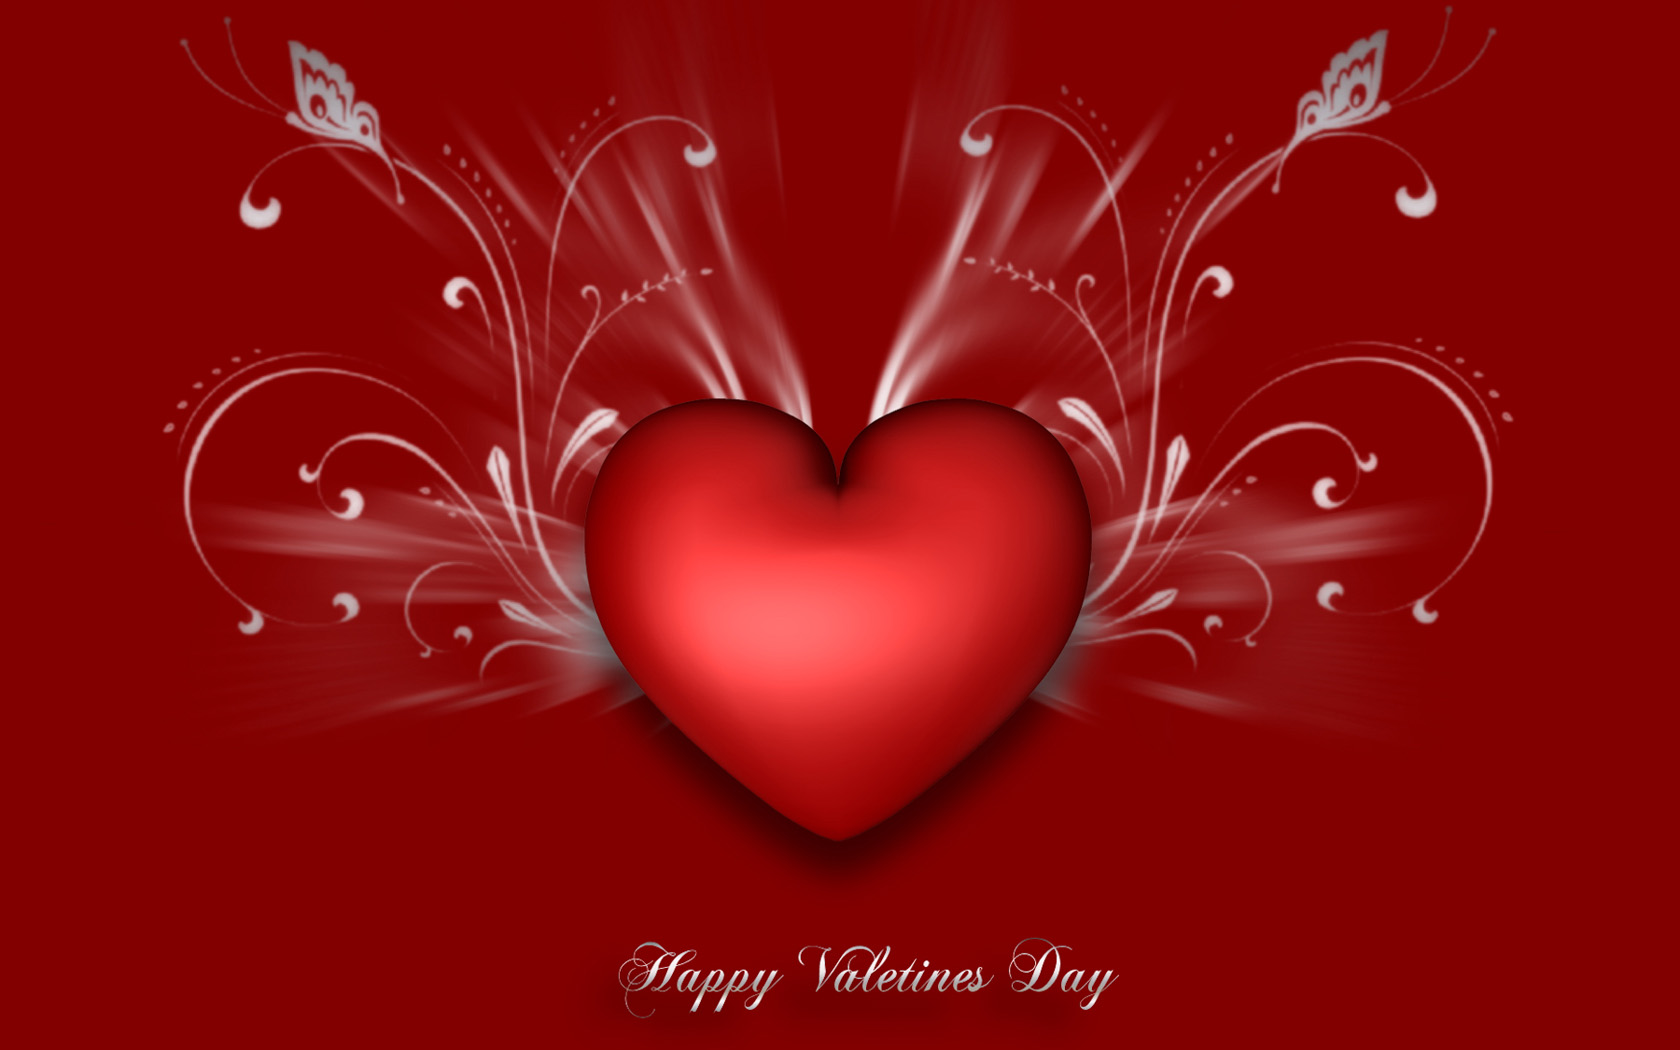 47] Valentines Bing Images Wallpaper on